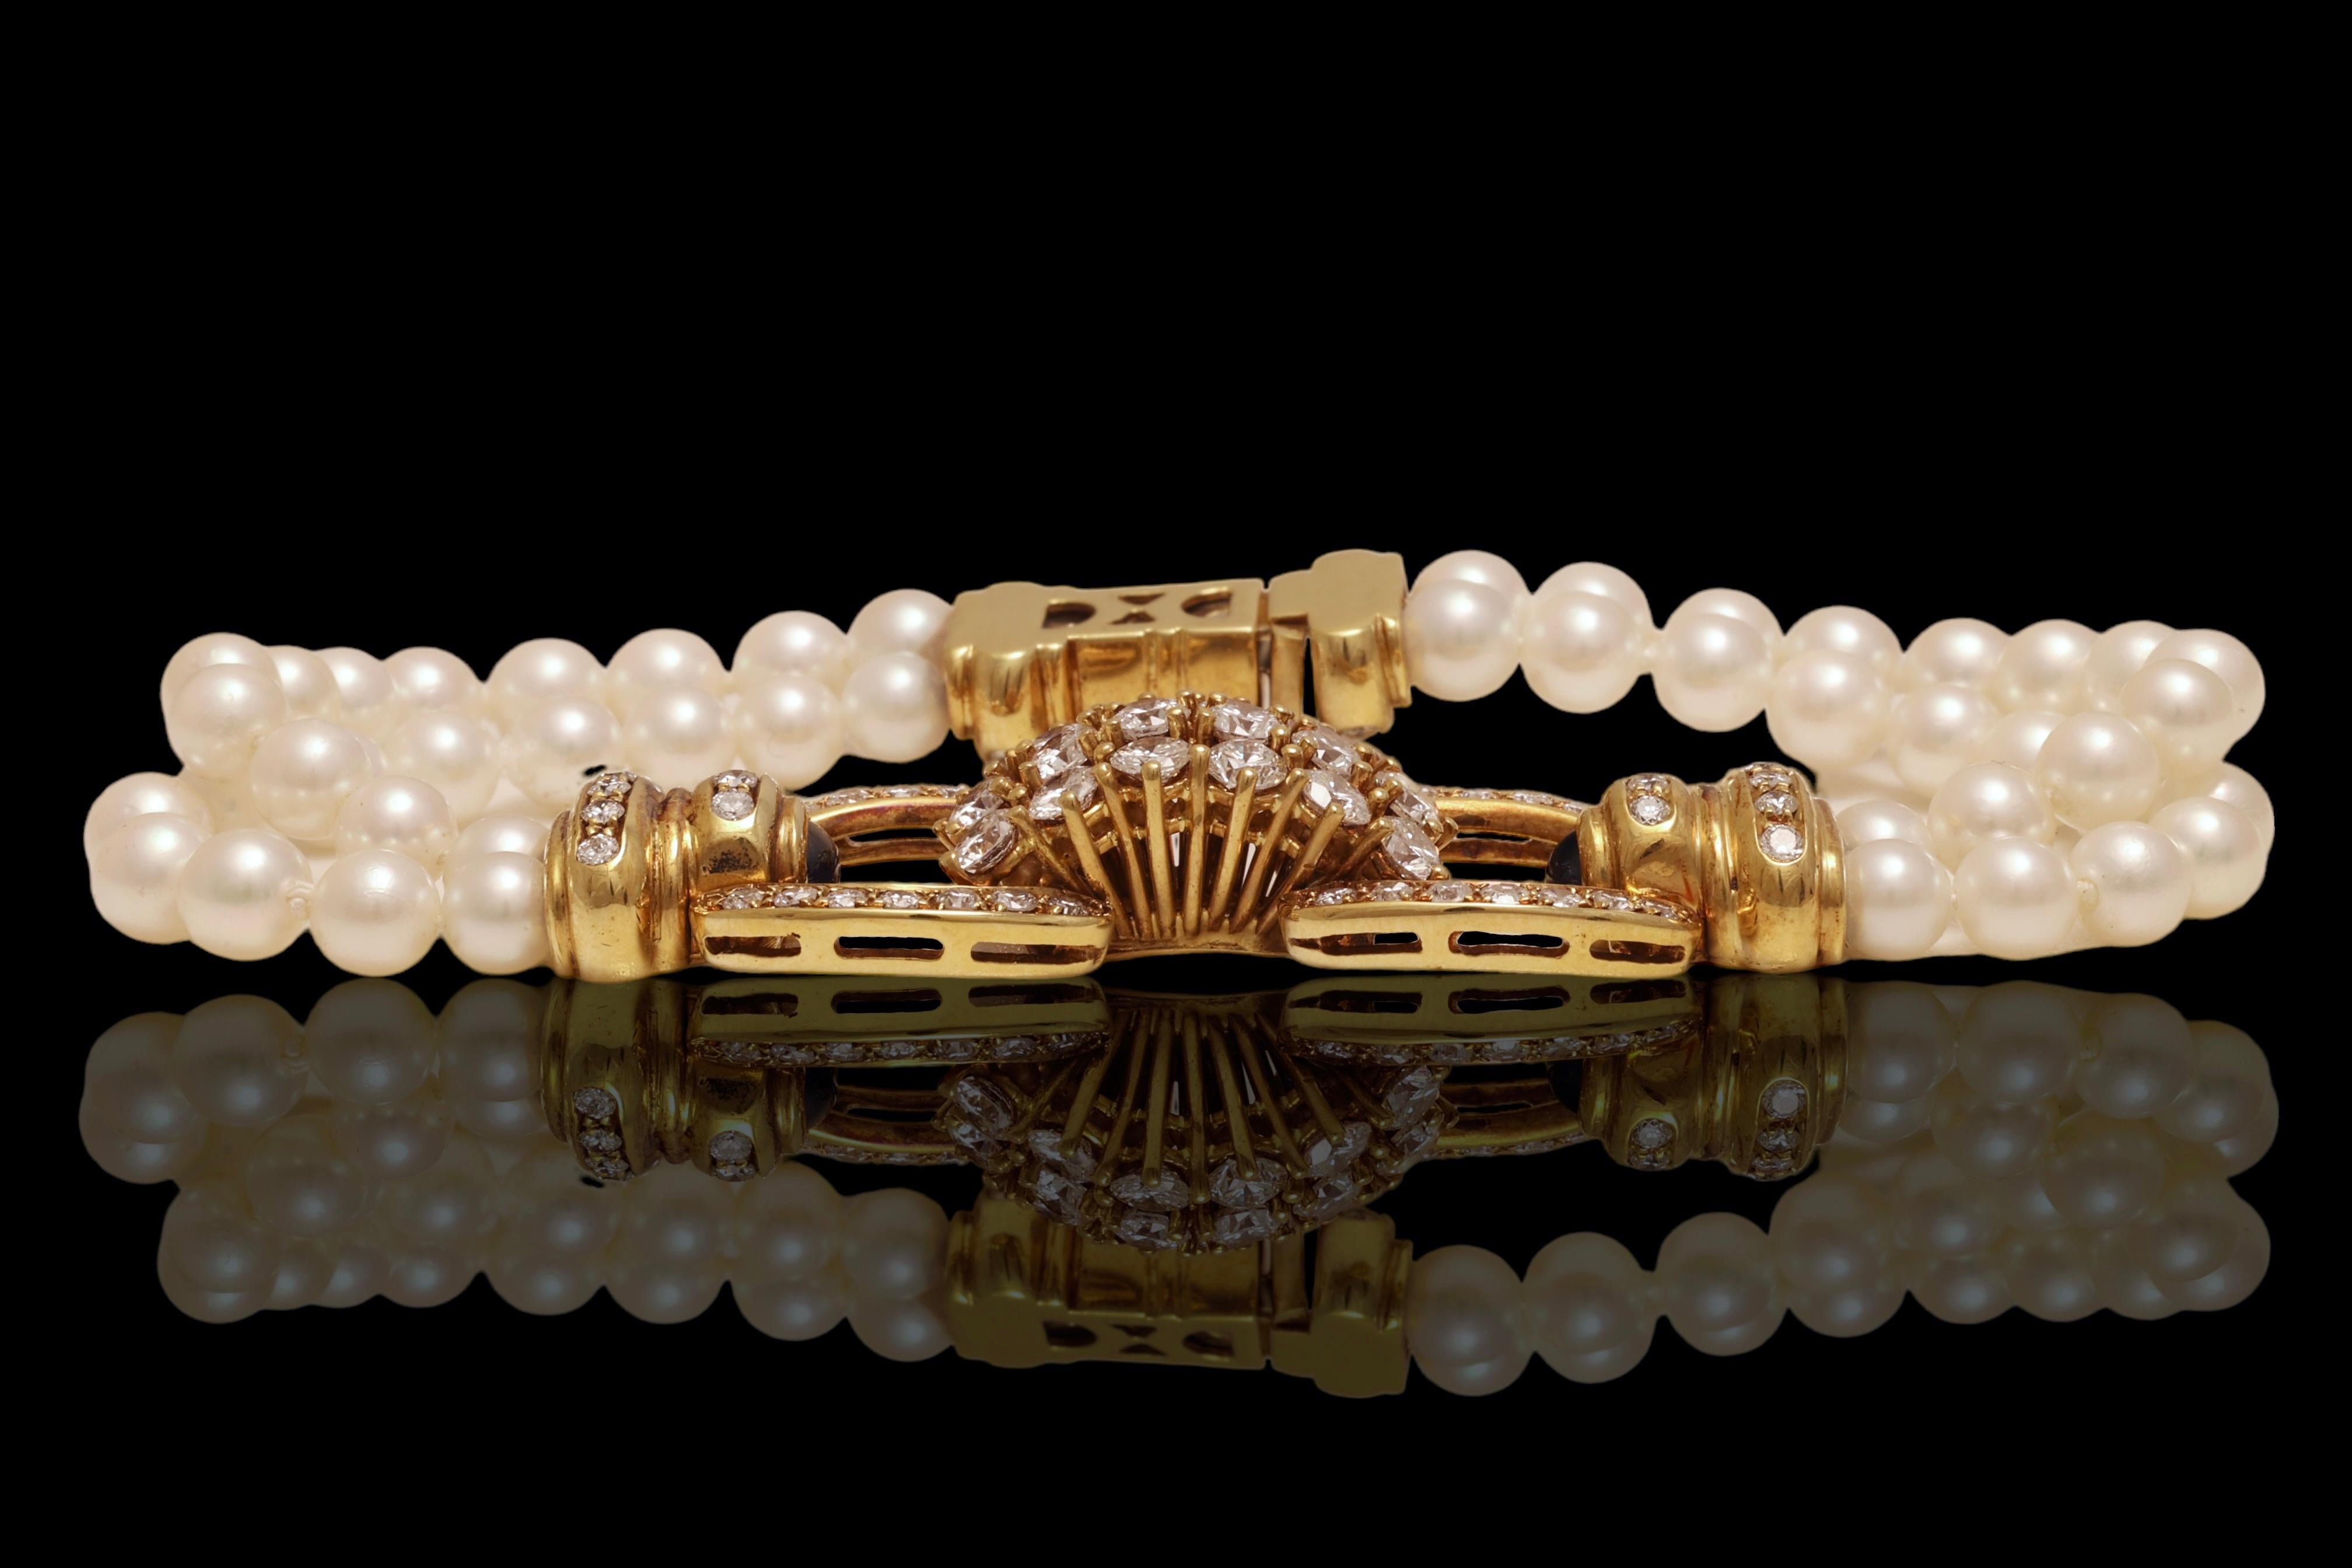 Women's or Men's Pearl Bracelet in 18kt Yellow Gold Set With 3.58ct. Diamonds, Pearls & Sapphires For Sale